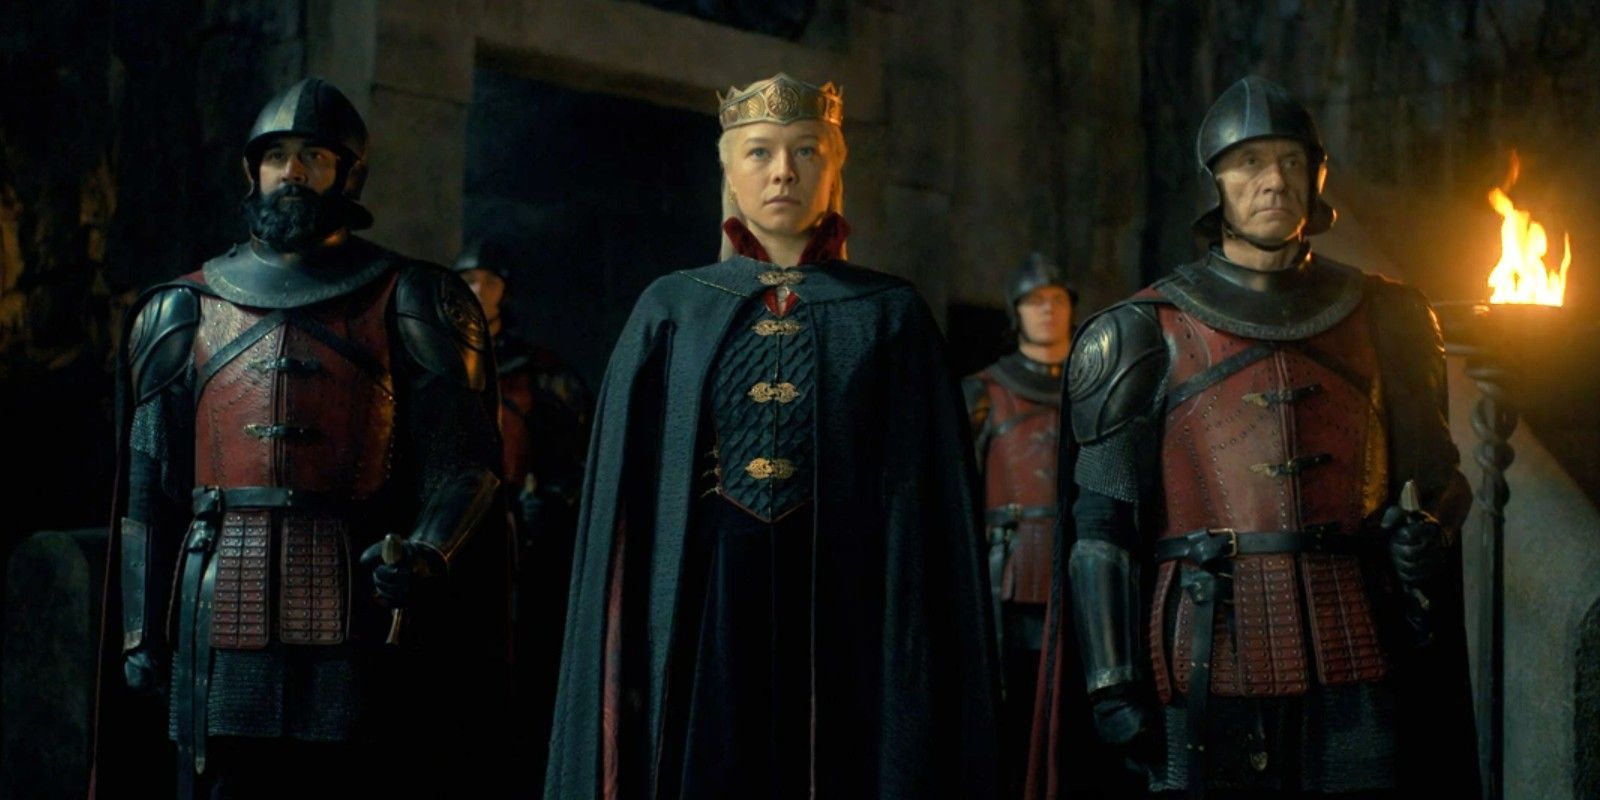 Queen Rhaenyra being followed by guards in House of the Dragon